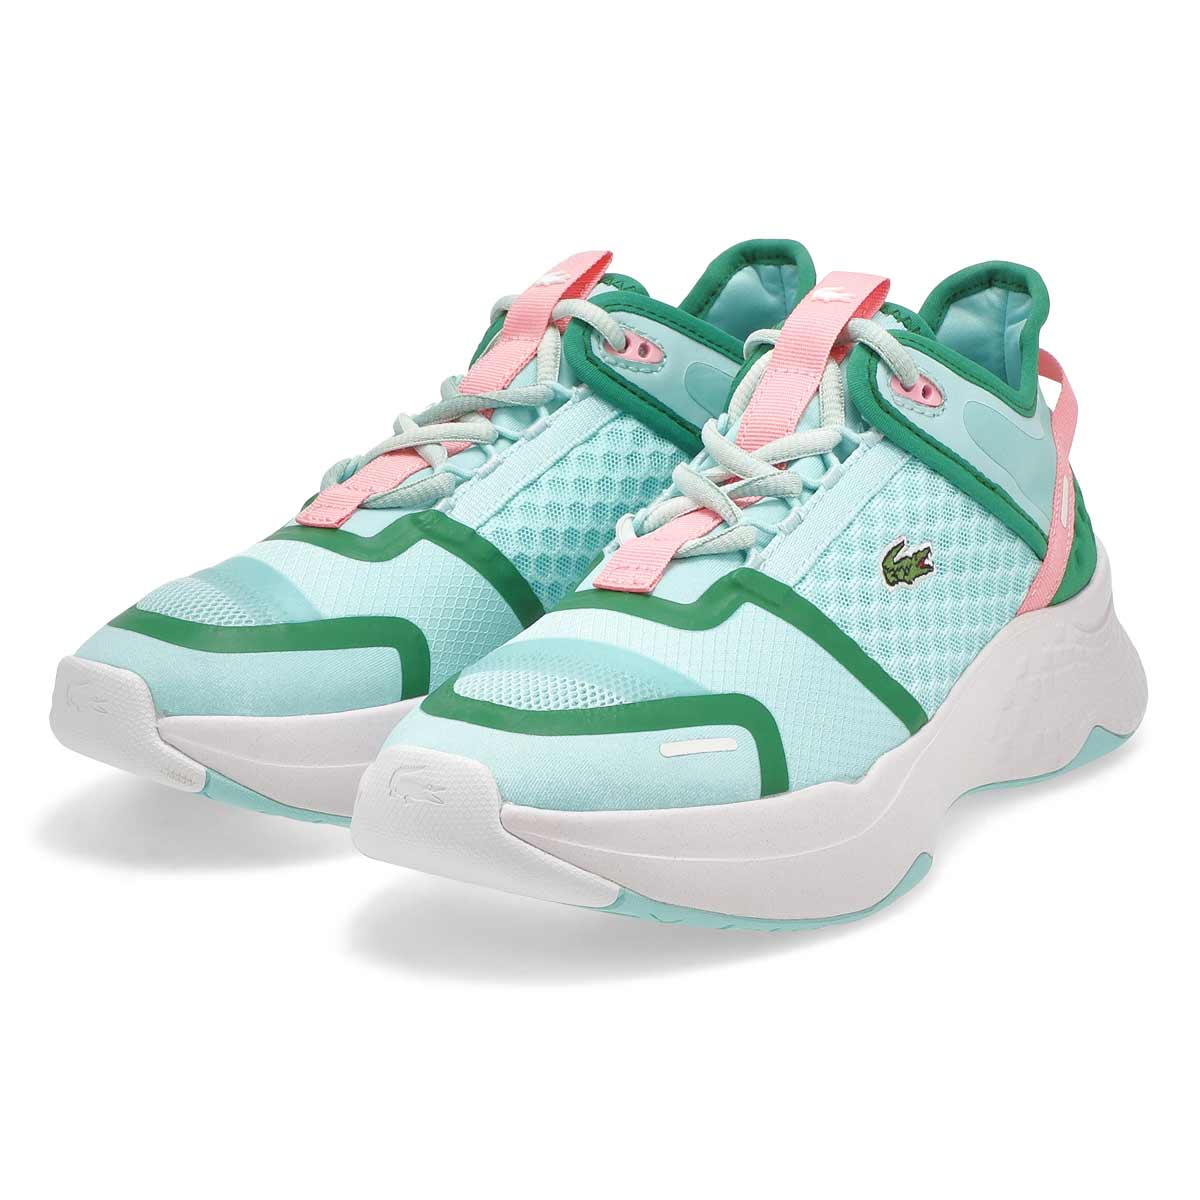 Women's Court-Drive Vnt Sneaker - Turquoise /Pink